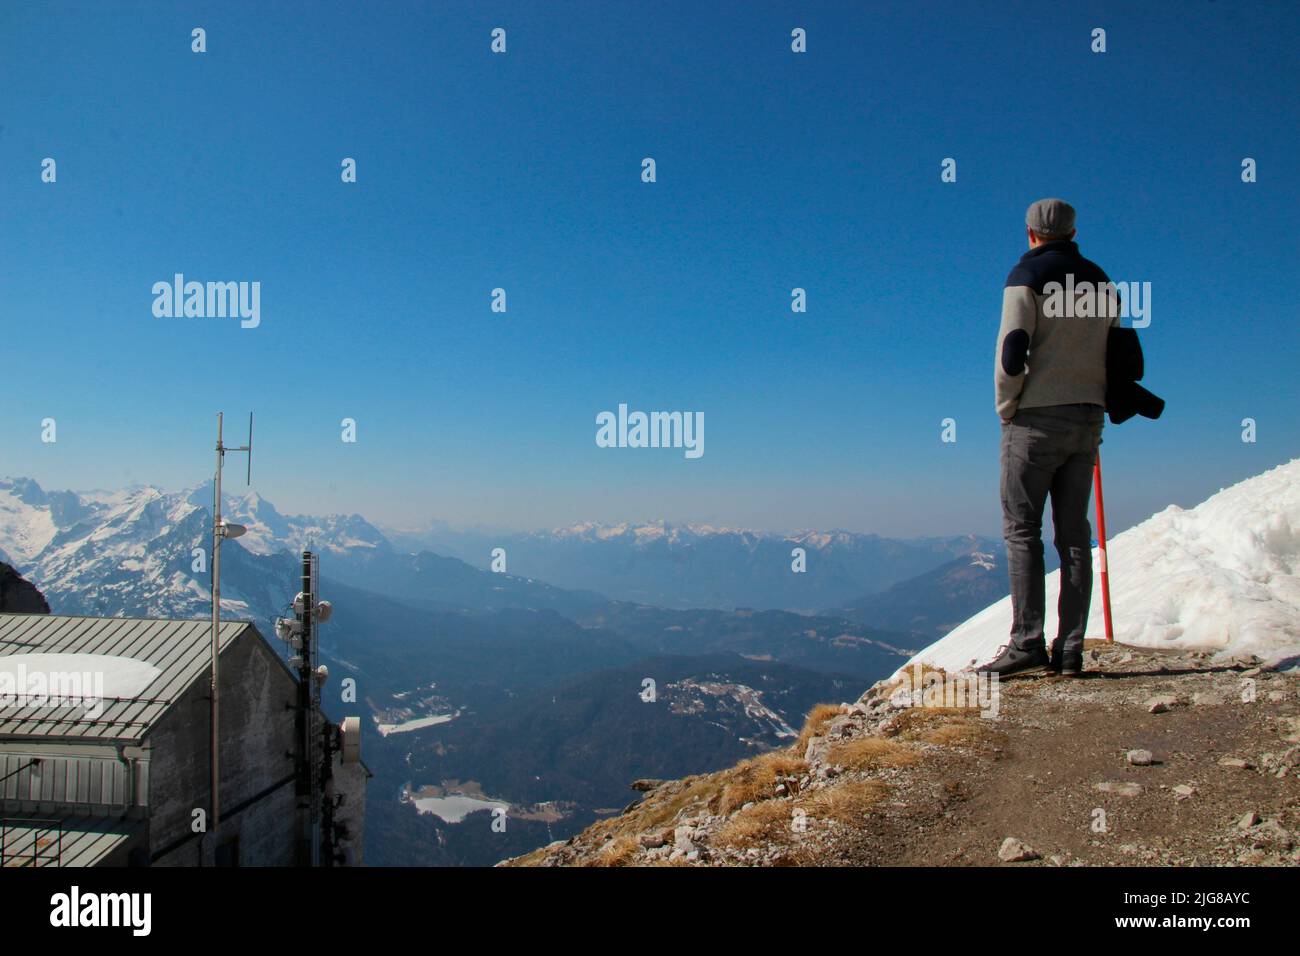 Young man, Karwendel mountain station, view from Karwendel, looking towards Wetterstein mountains, Mittenwald in the foreground, against blue sky, Stock Photo